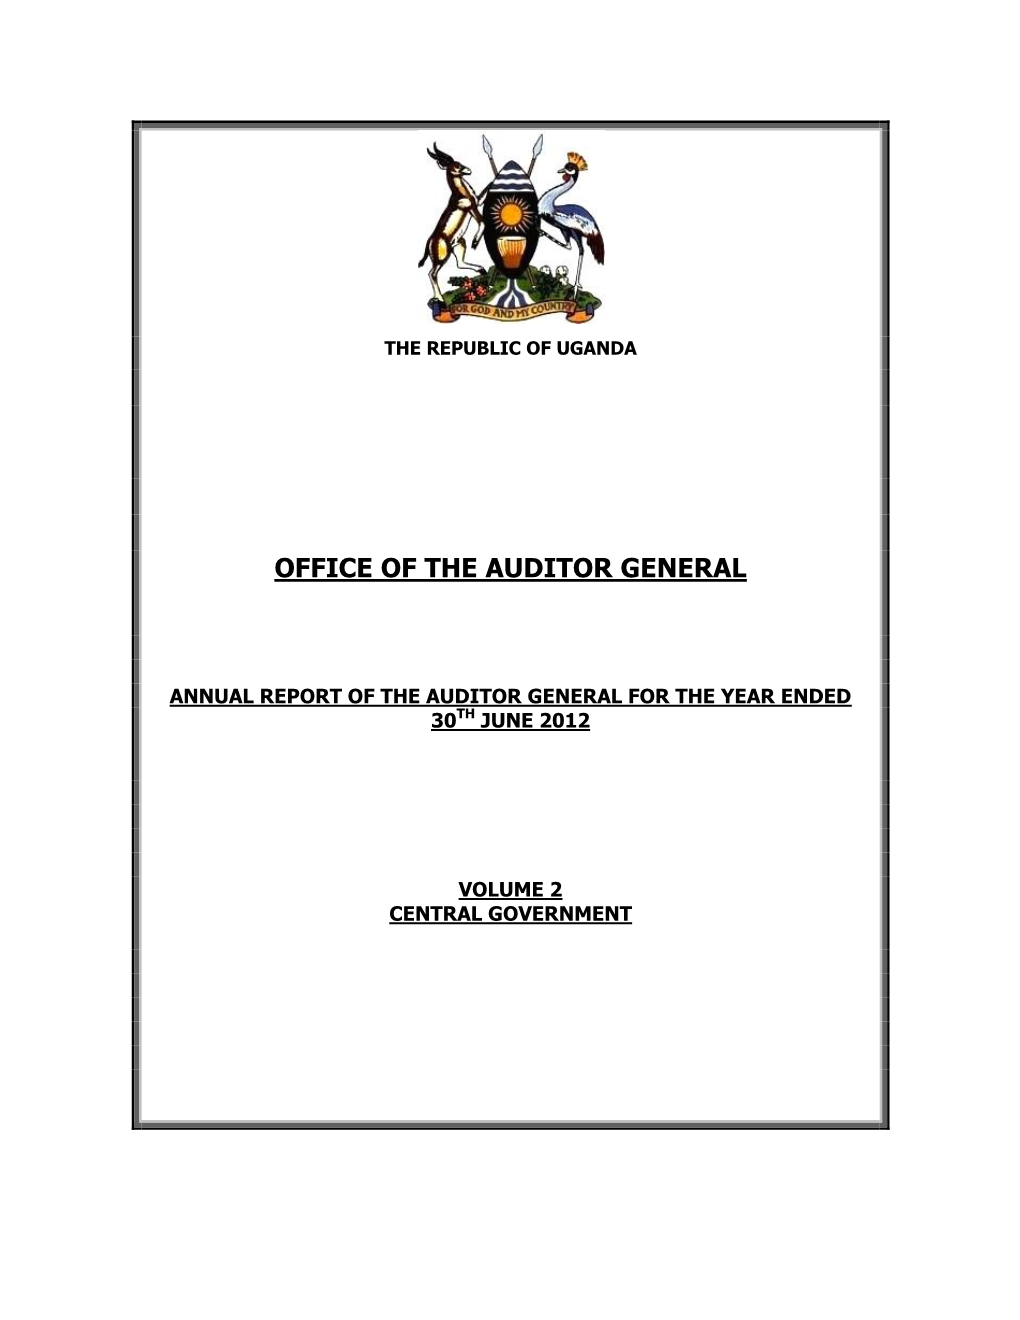 Annual Report of the Auditor General for the Year Ended 30Th June 2012